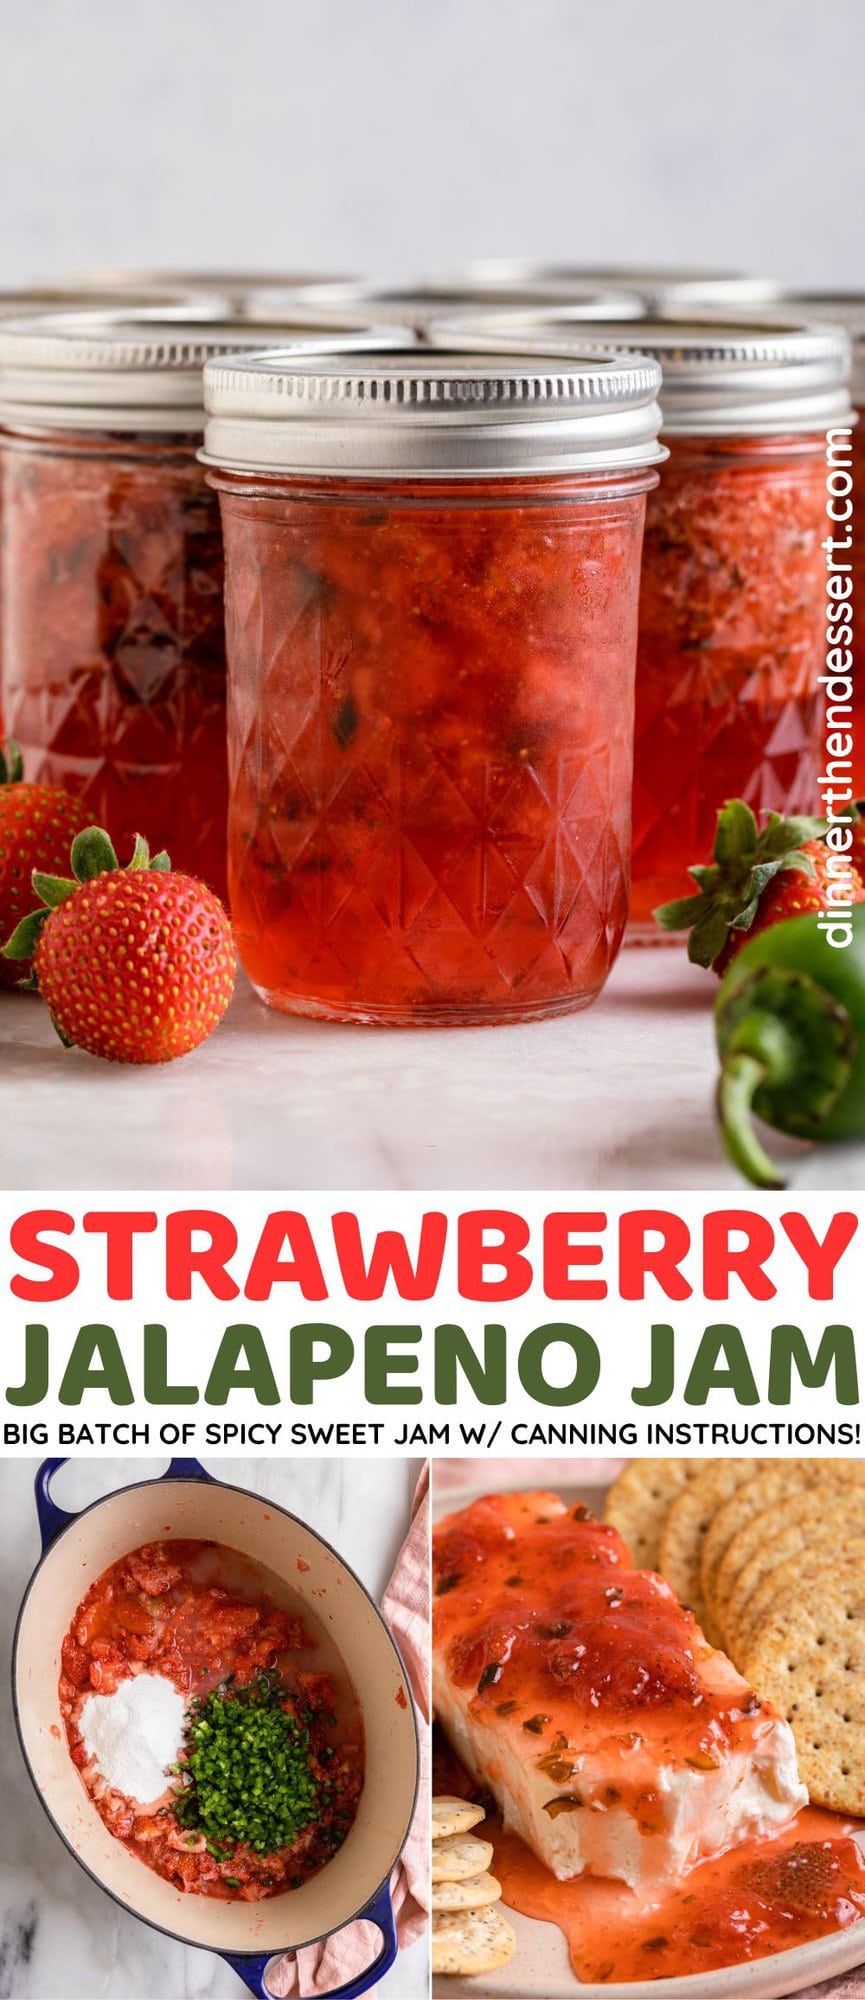 Strawberry Jalapeno Jam in jars, smaller bottom two panels are ingredients in pot and jam on cheese with crackers. Text across middle says Strawberry Jalapeno Jam, Big Batch of Spicy Sweet Jam w/ Canning Instructions!